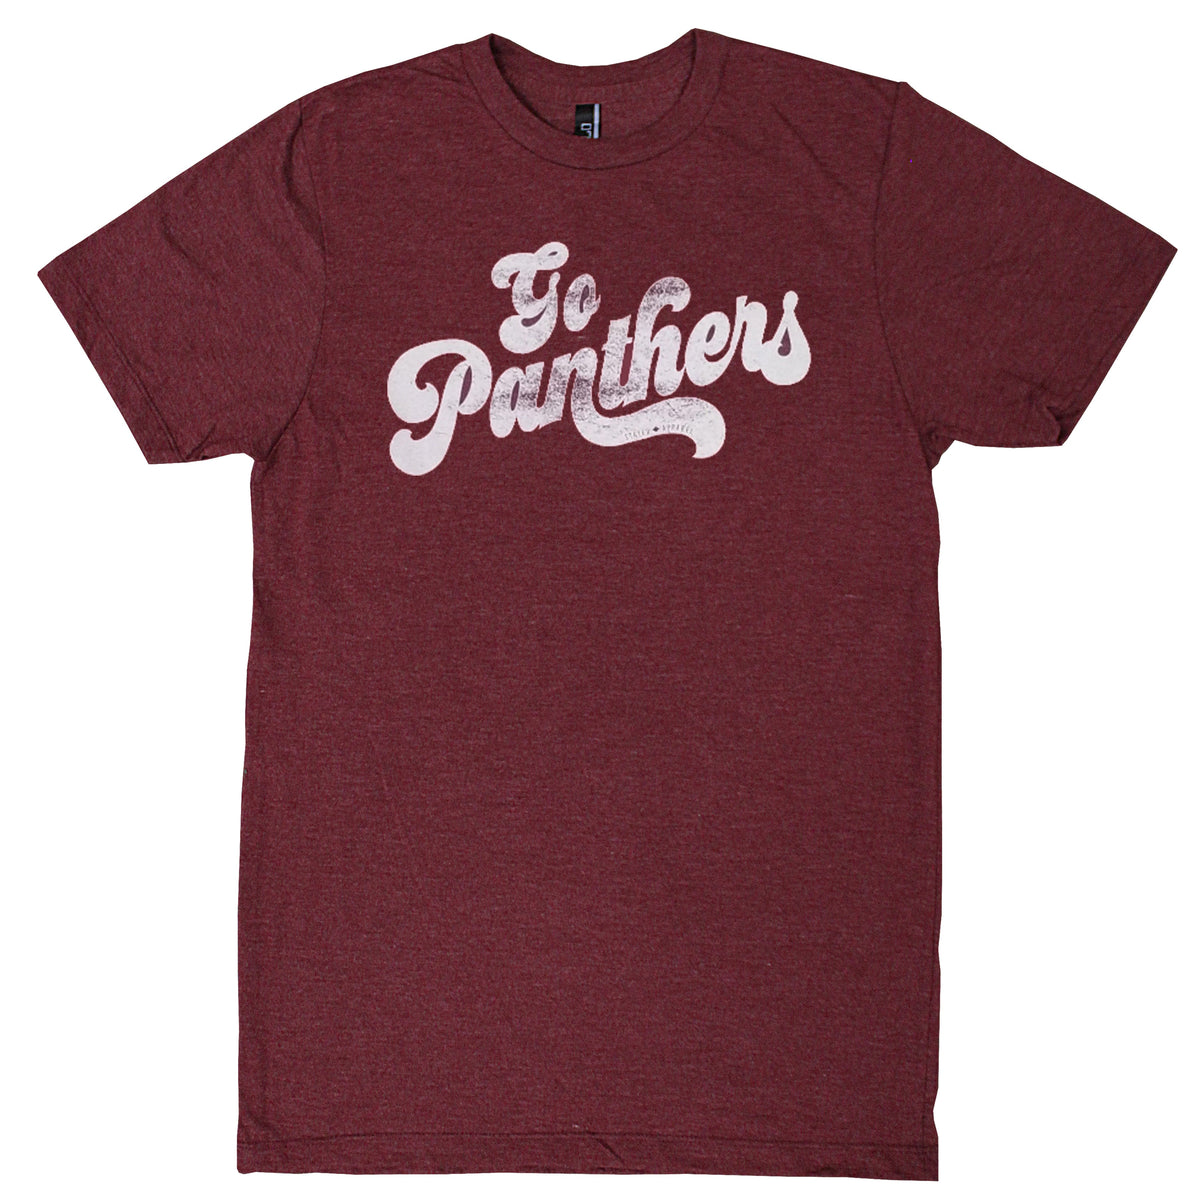 Go Panthers Youth Tee